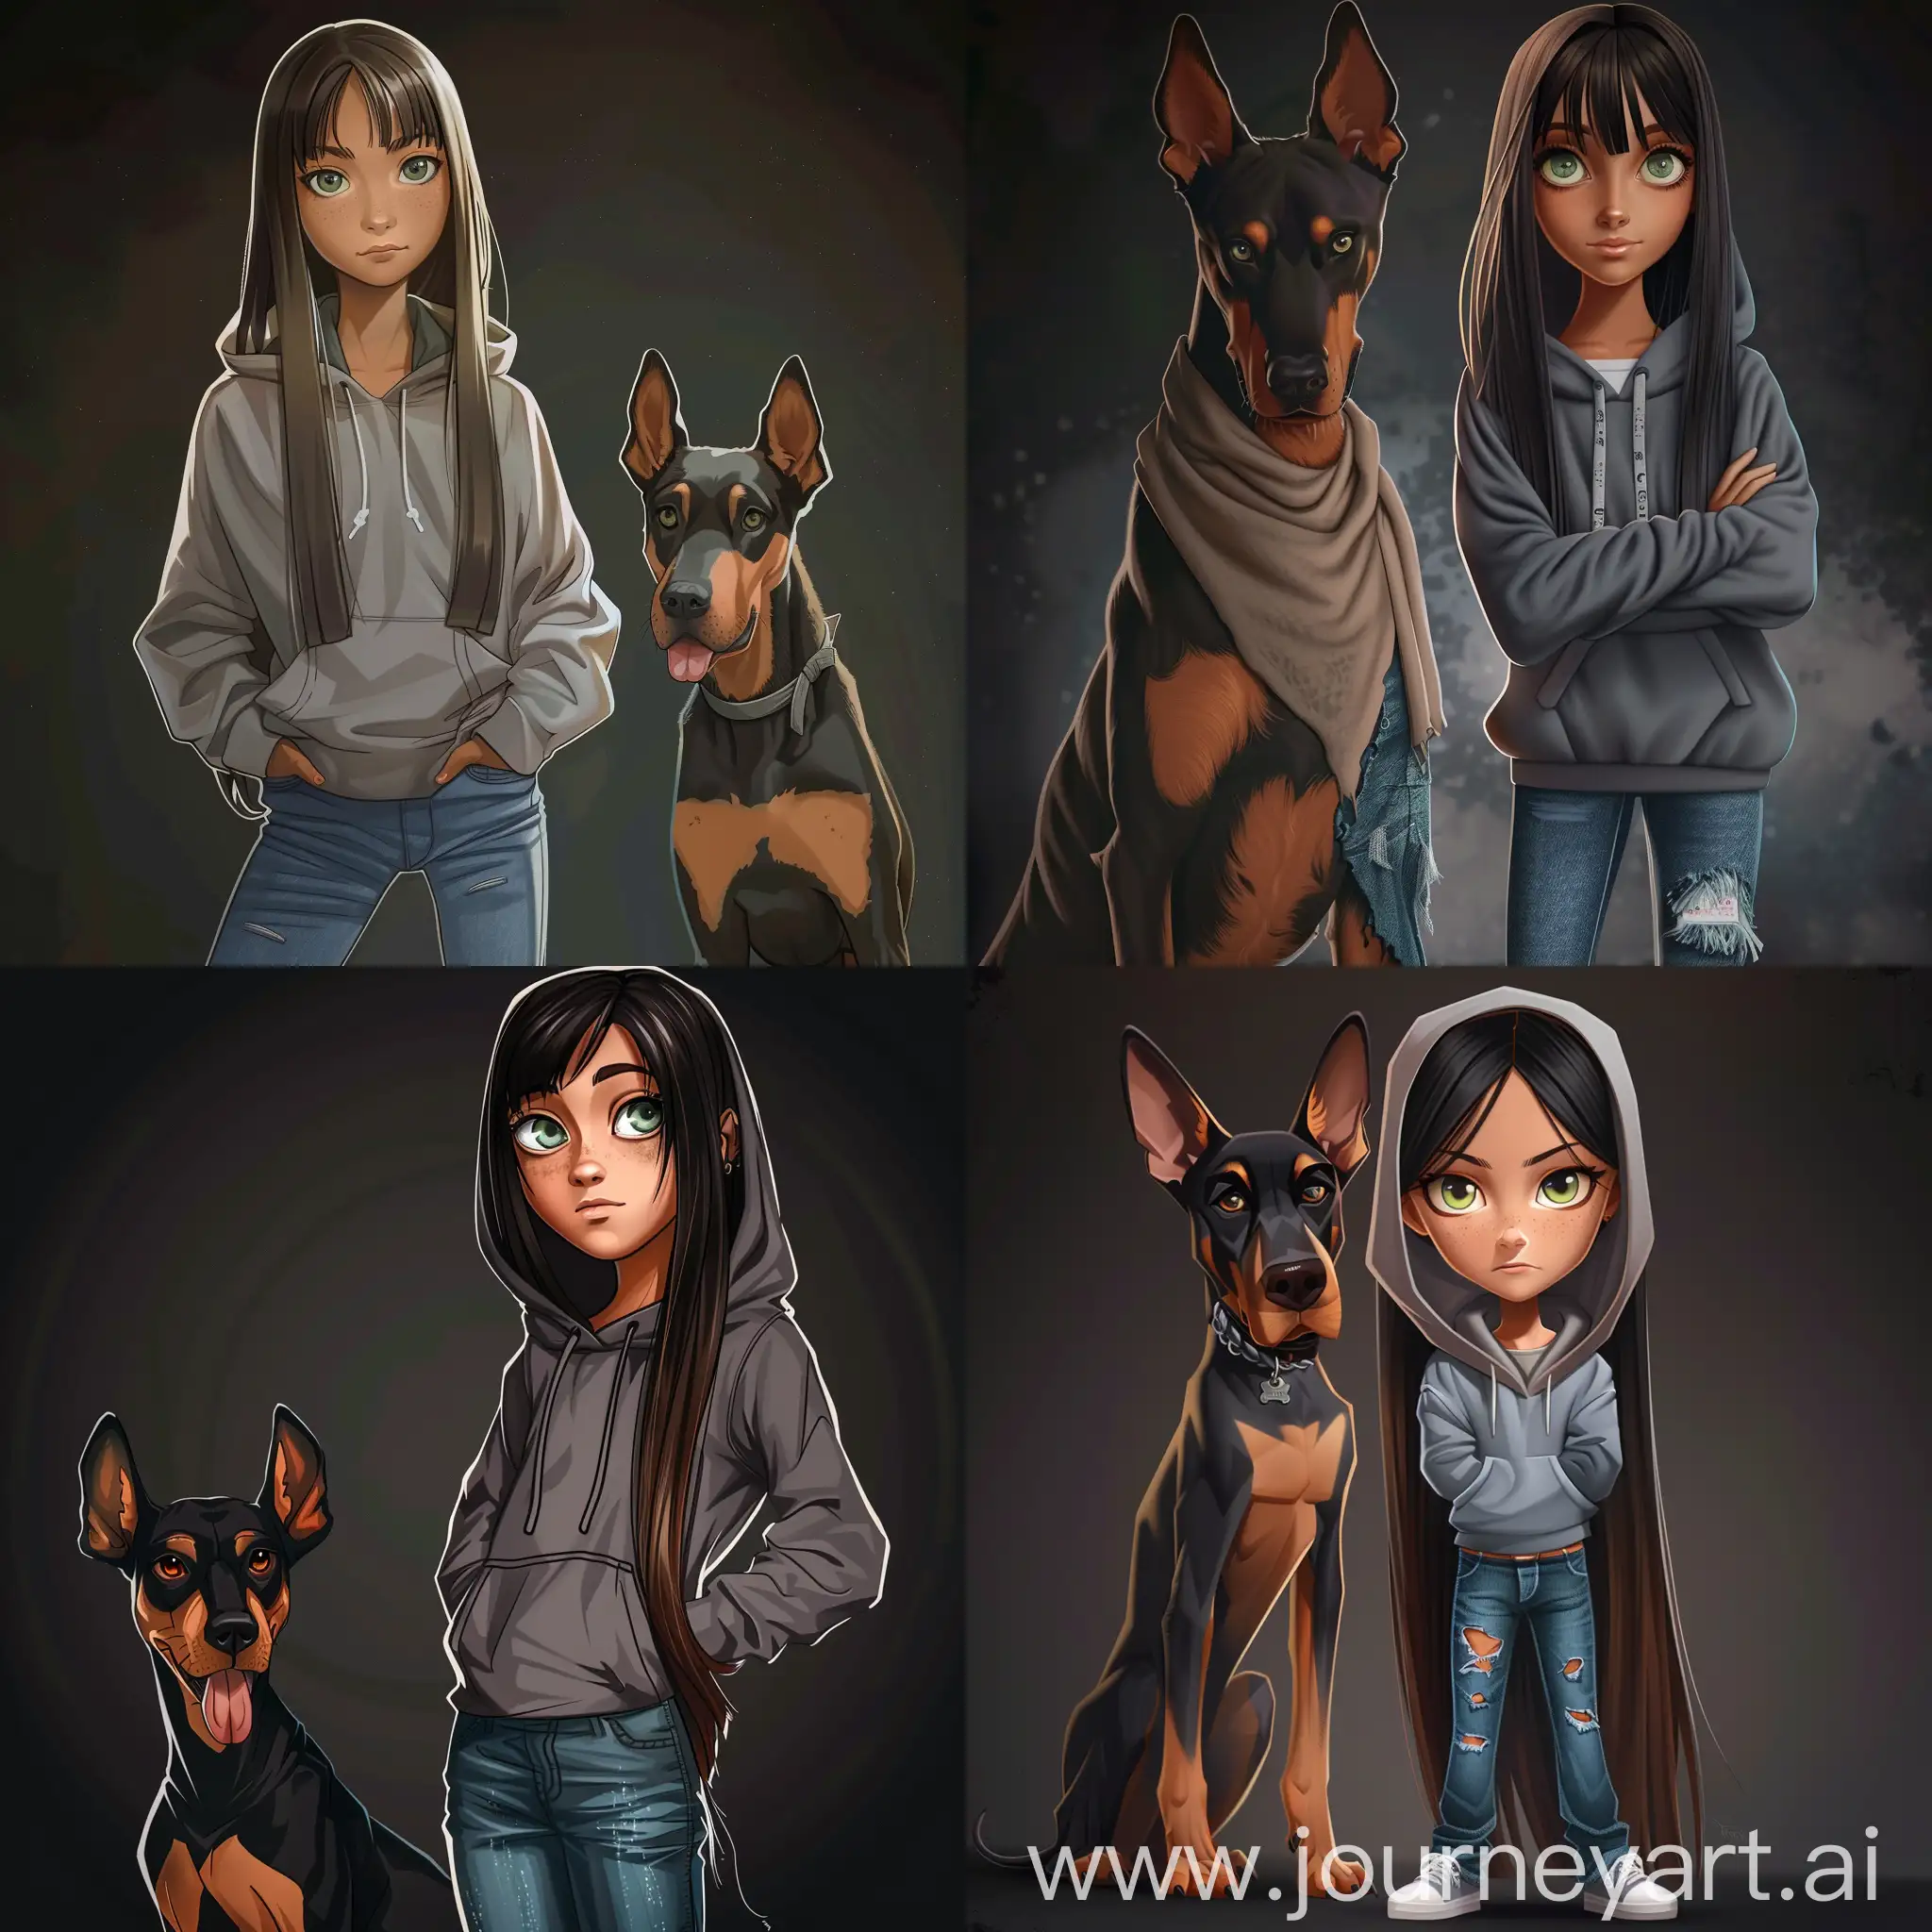 Beautiful girl, straight dark brown hair, gray-green eyes, white skin, teenager, 15 years old, dressed in jeans and an oversize hoodie, next to a doberman, high quality, high detail, dark background, cartoon art